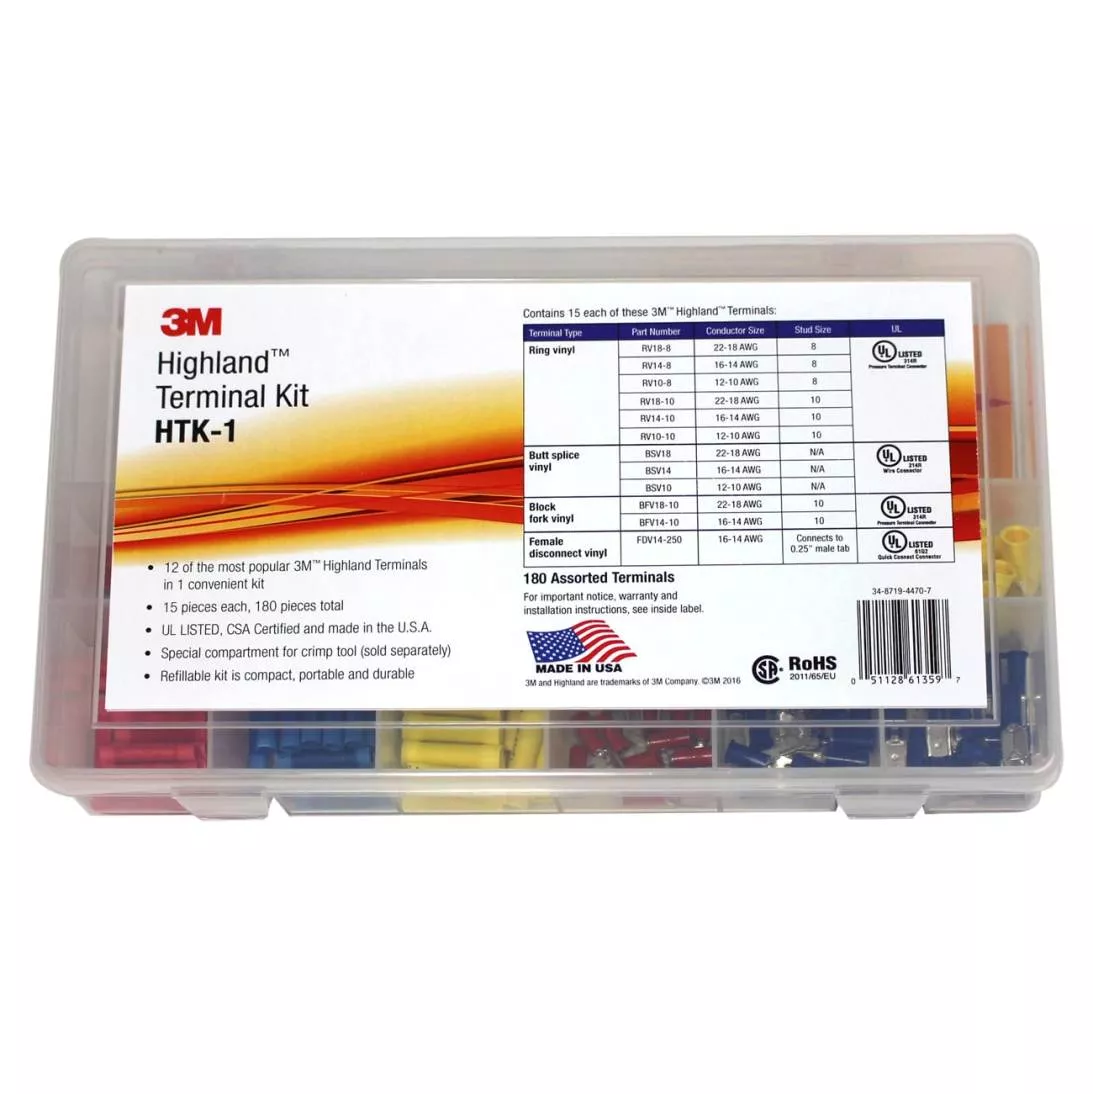 3M™ Highland™ Terminal Kit, HTK-1, 180 pieces, refillable kit is
compact, portable and durable, 4 Kits/Case